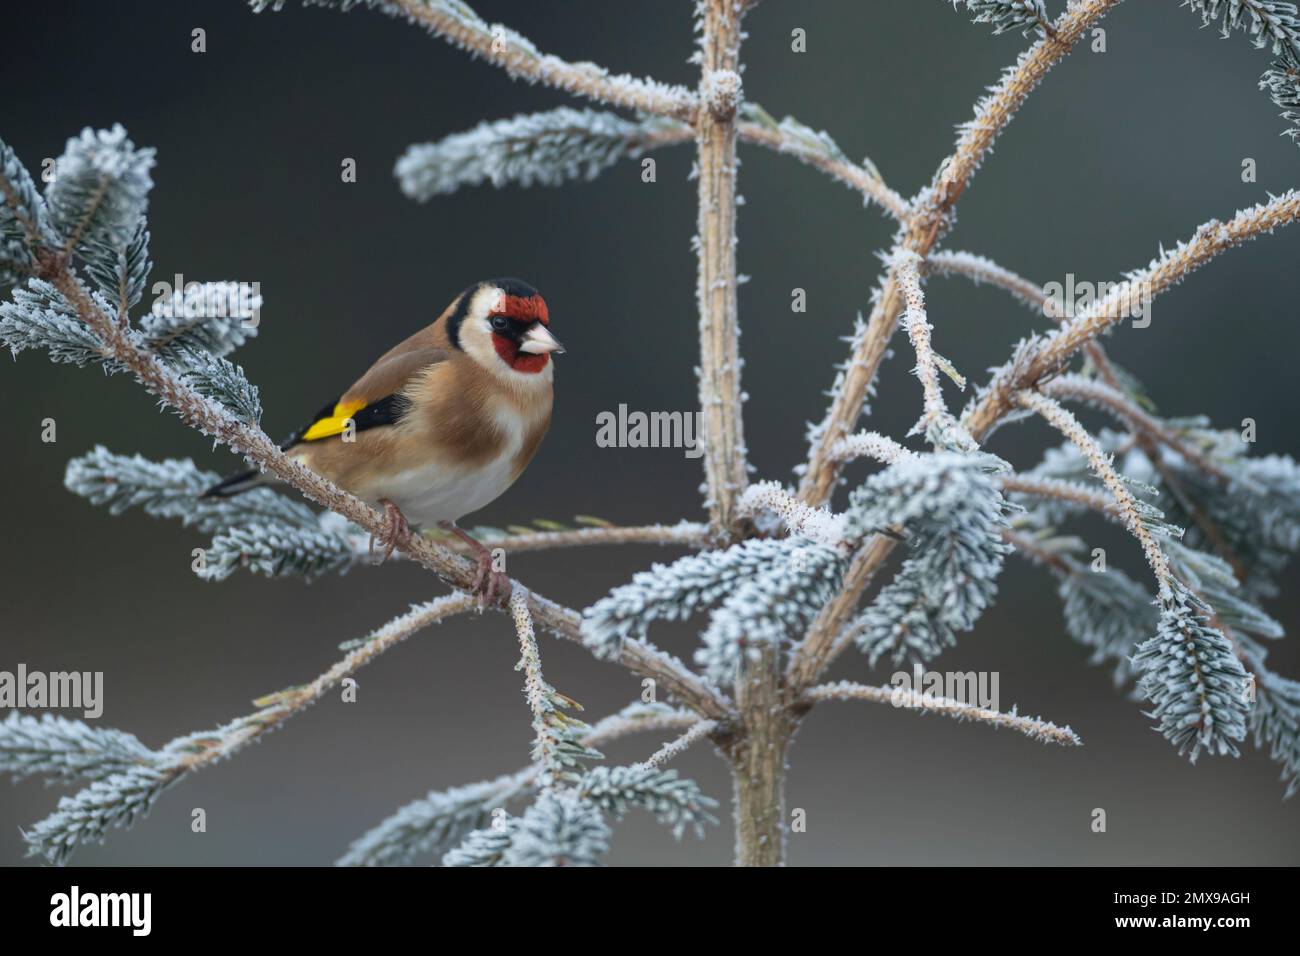 European goldfinch Carduelis carduelis adult bird on a frosted Christmas tree, Suffolk, England, UK, Stock Photo